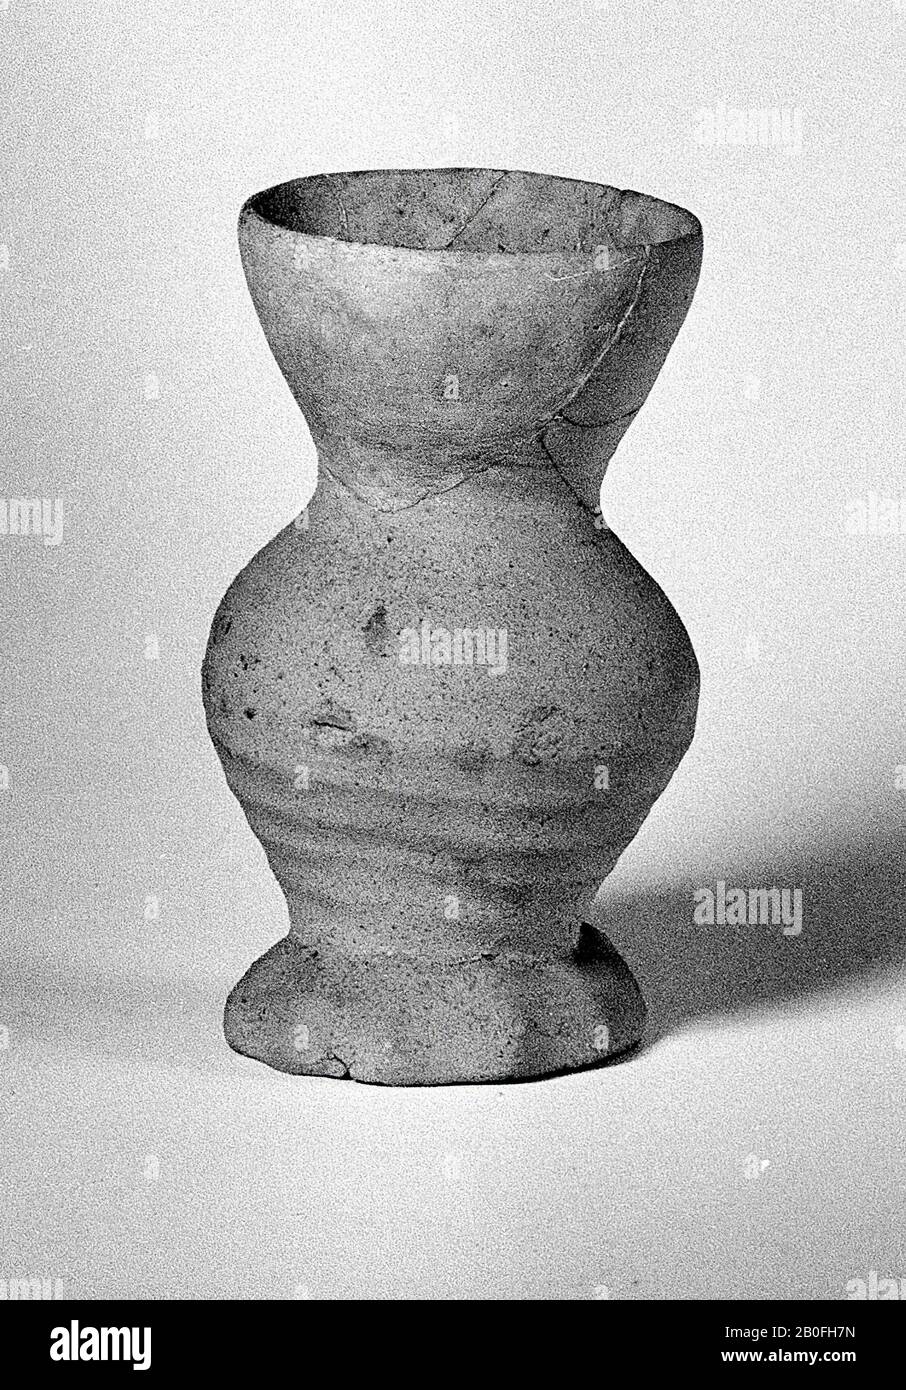 Cup of light gray earthenware, 15th century. Old glues and additions., Cup, earthenware (smooth wall), h: 11.4 cm, diam: 7 cm, lmeb 1375-1425 AD, Netherlands, Gelderland, Buren, Zoelen Stock Photo